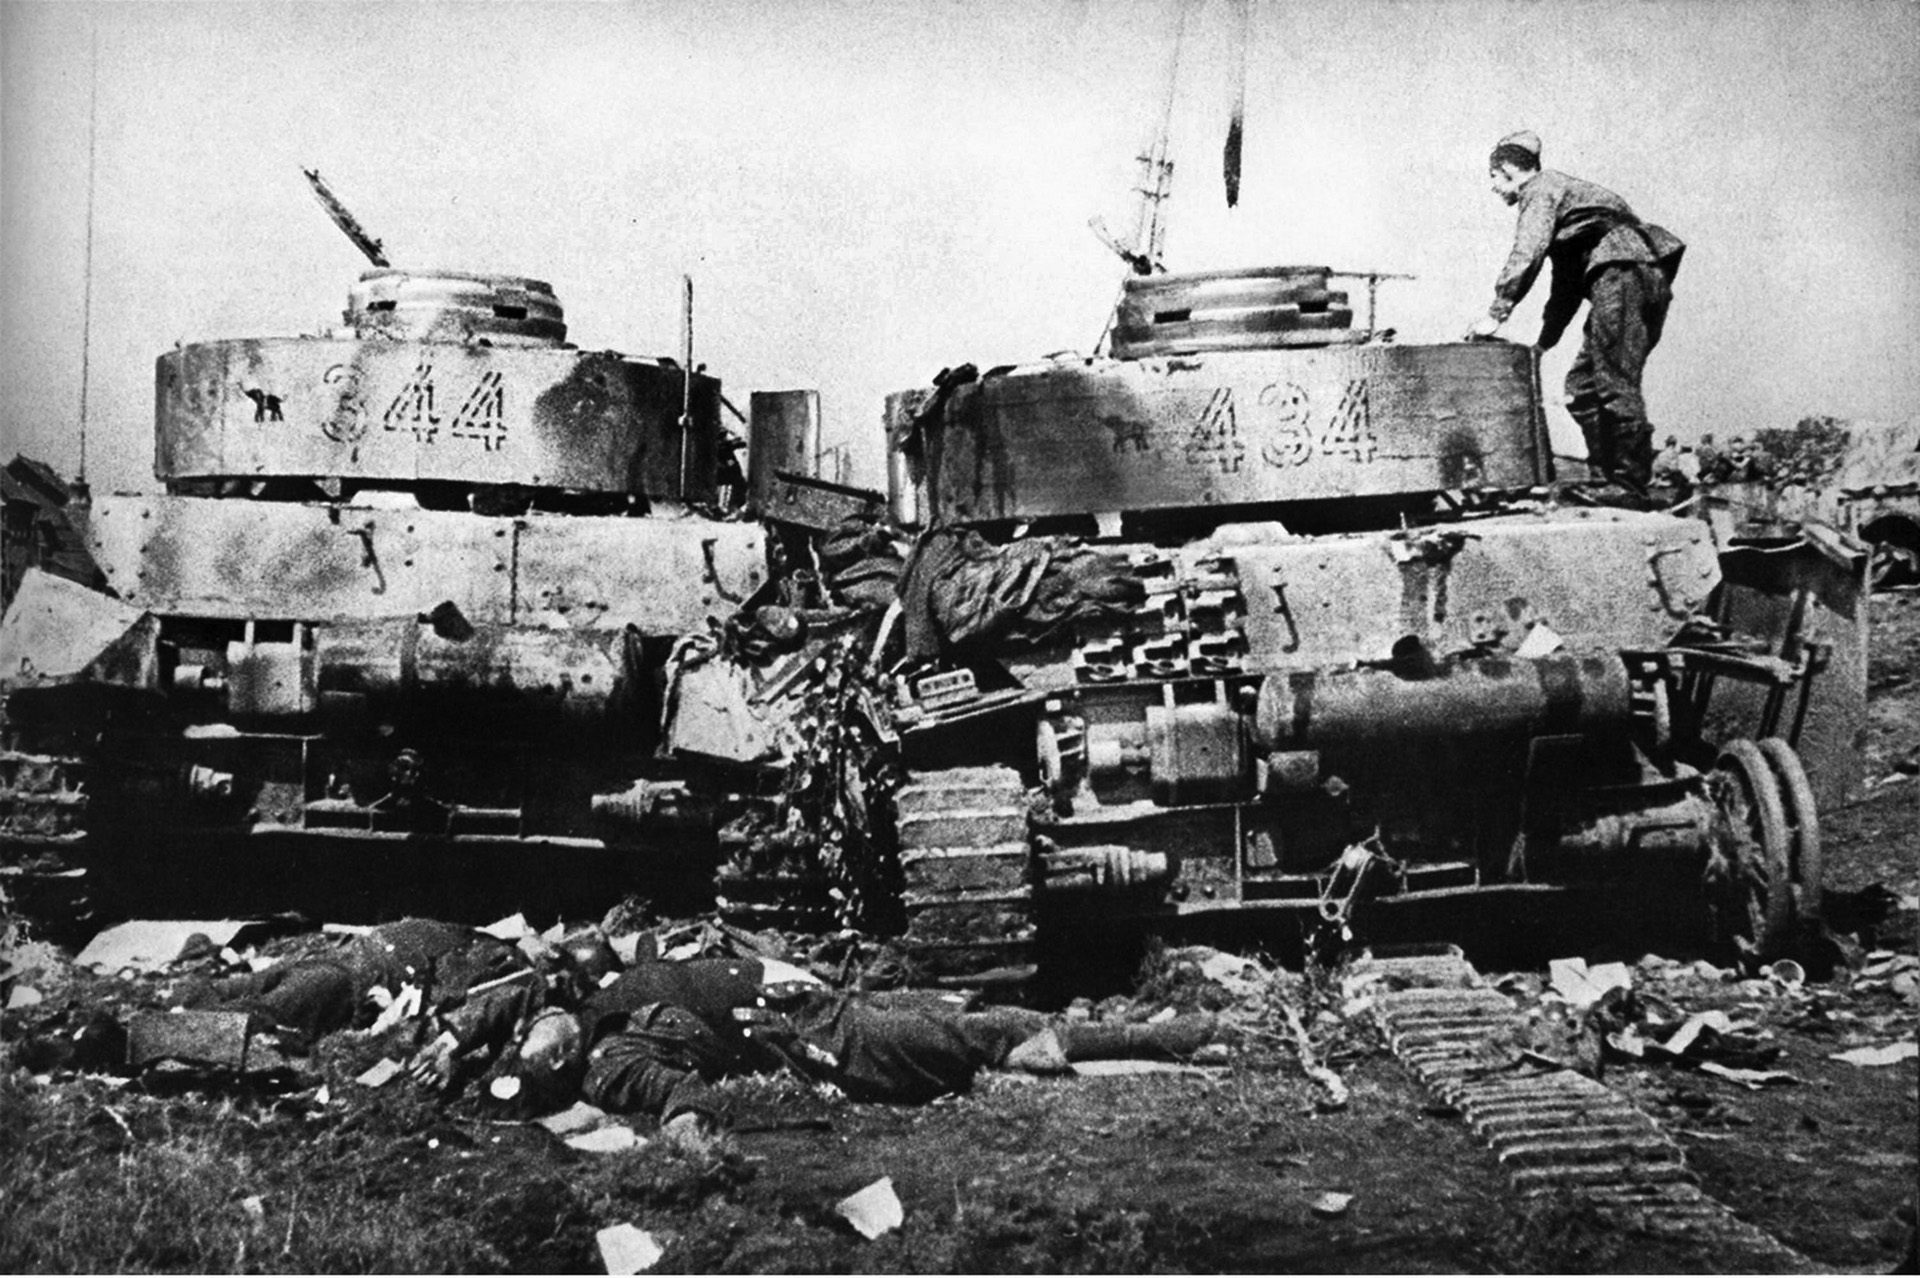 By the launch of Operation Bagration, the Red Army was employing deception on a grand scale. The Germans were actually duped into redeploying military assets, including artillery and tanks, on several occasions.